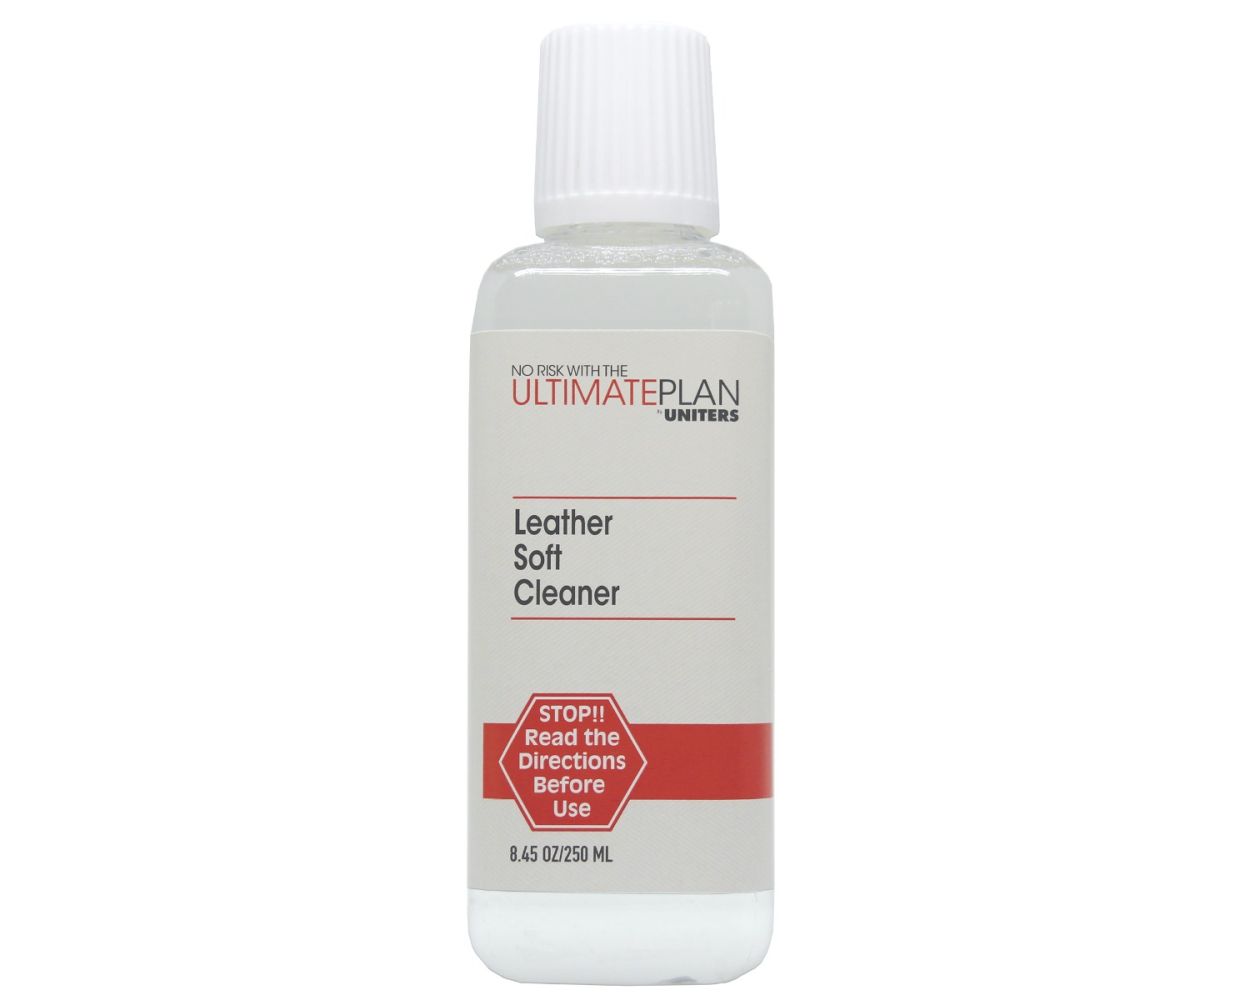 ULTIMATE PLAN Leather Soft Cleaner